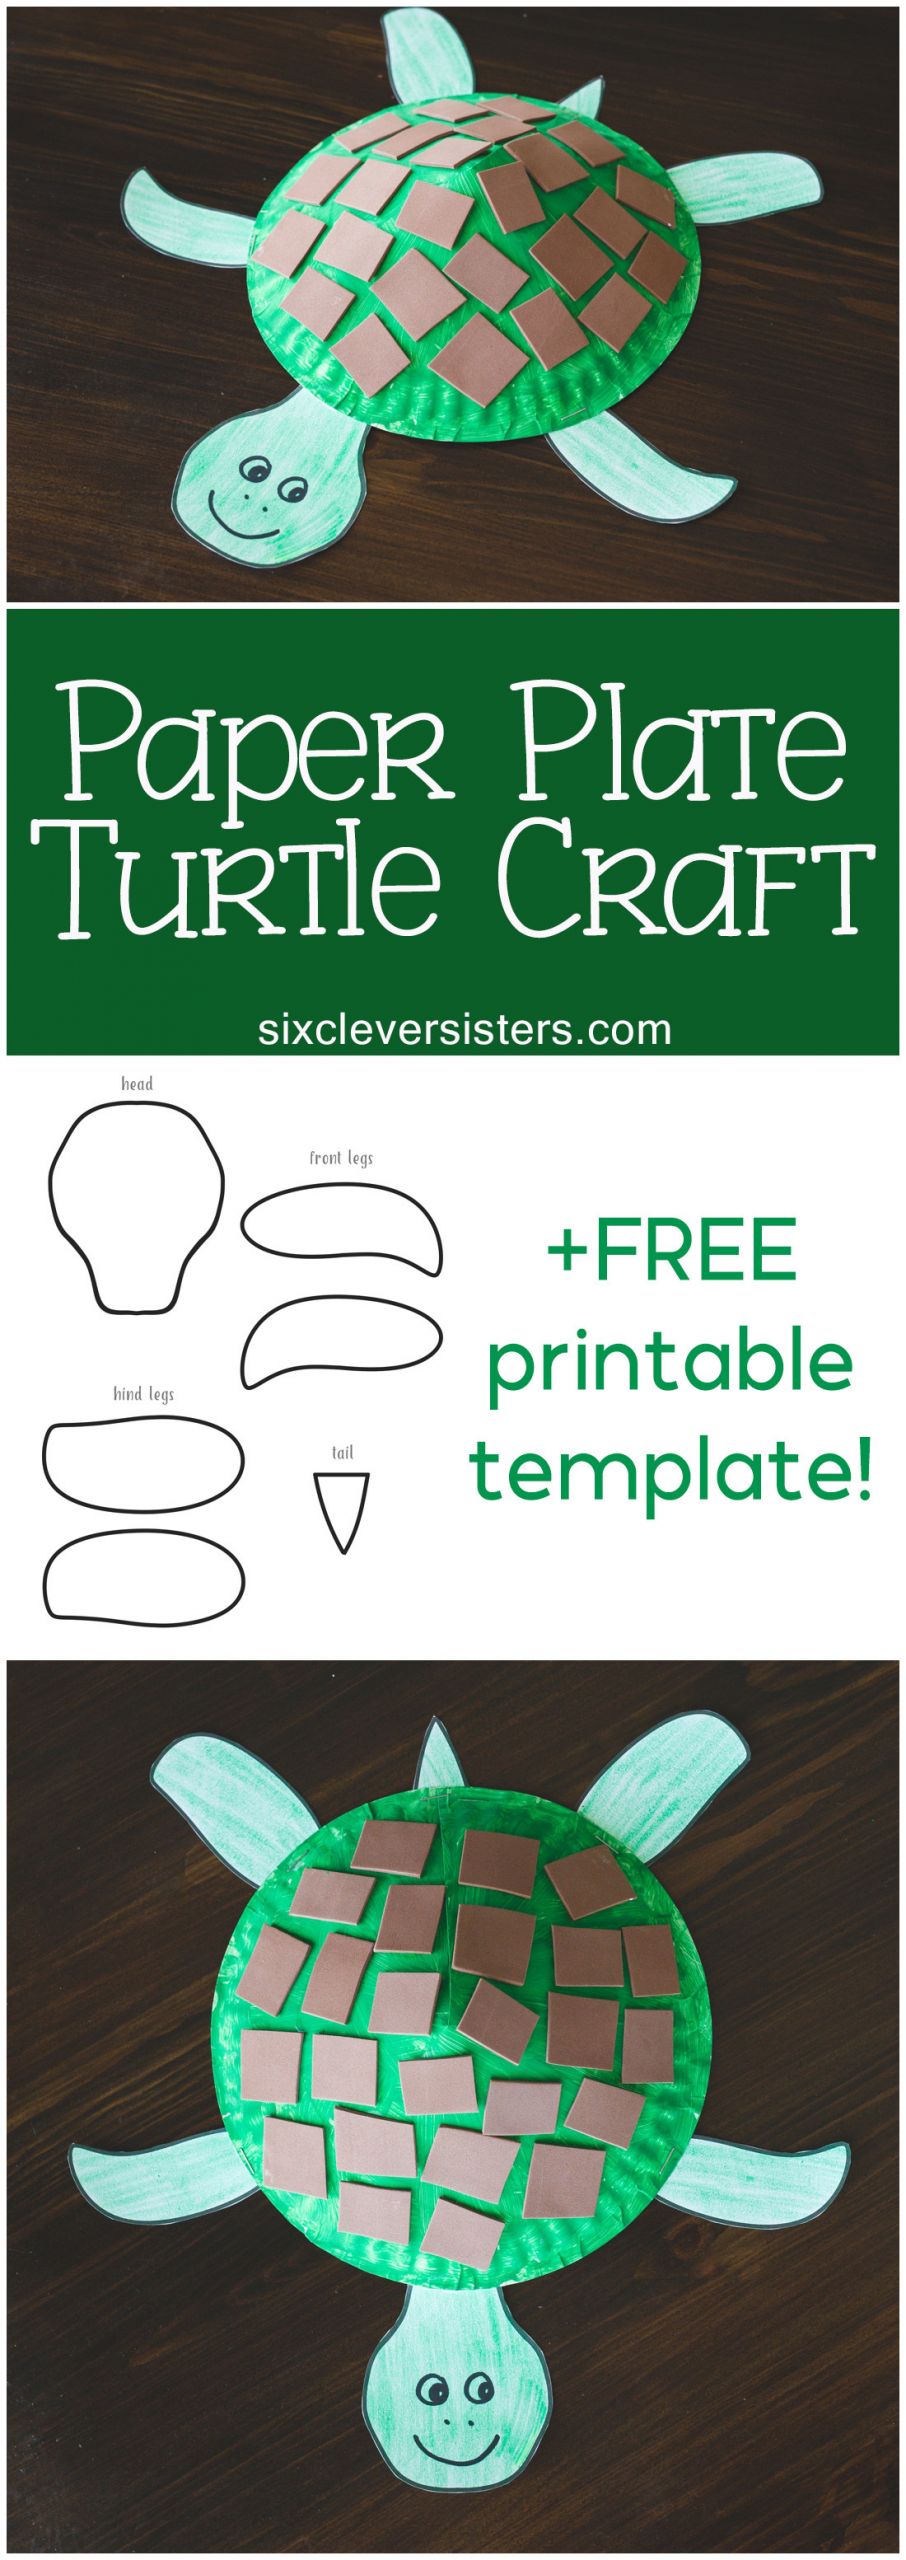 Paper Craft For Kids
 Paper Plate Turtle Craft for Kids Free Printable